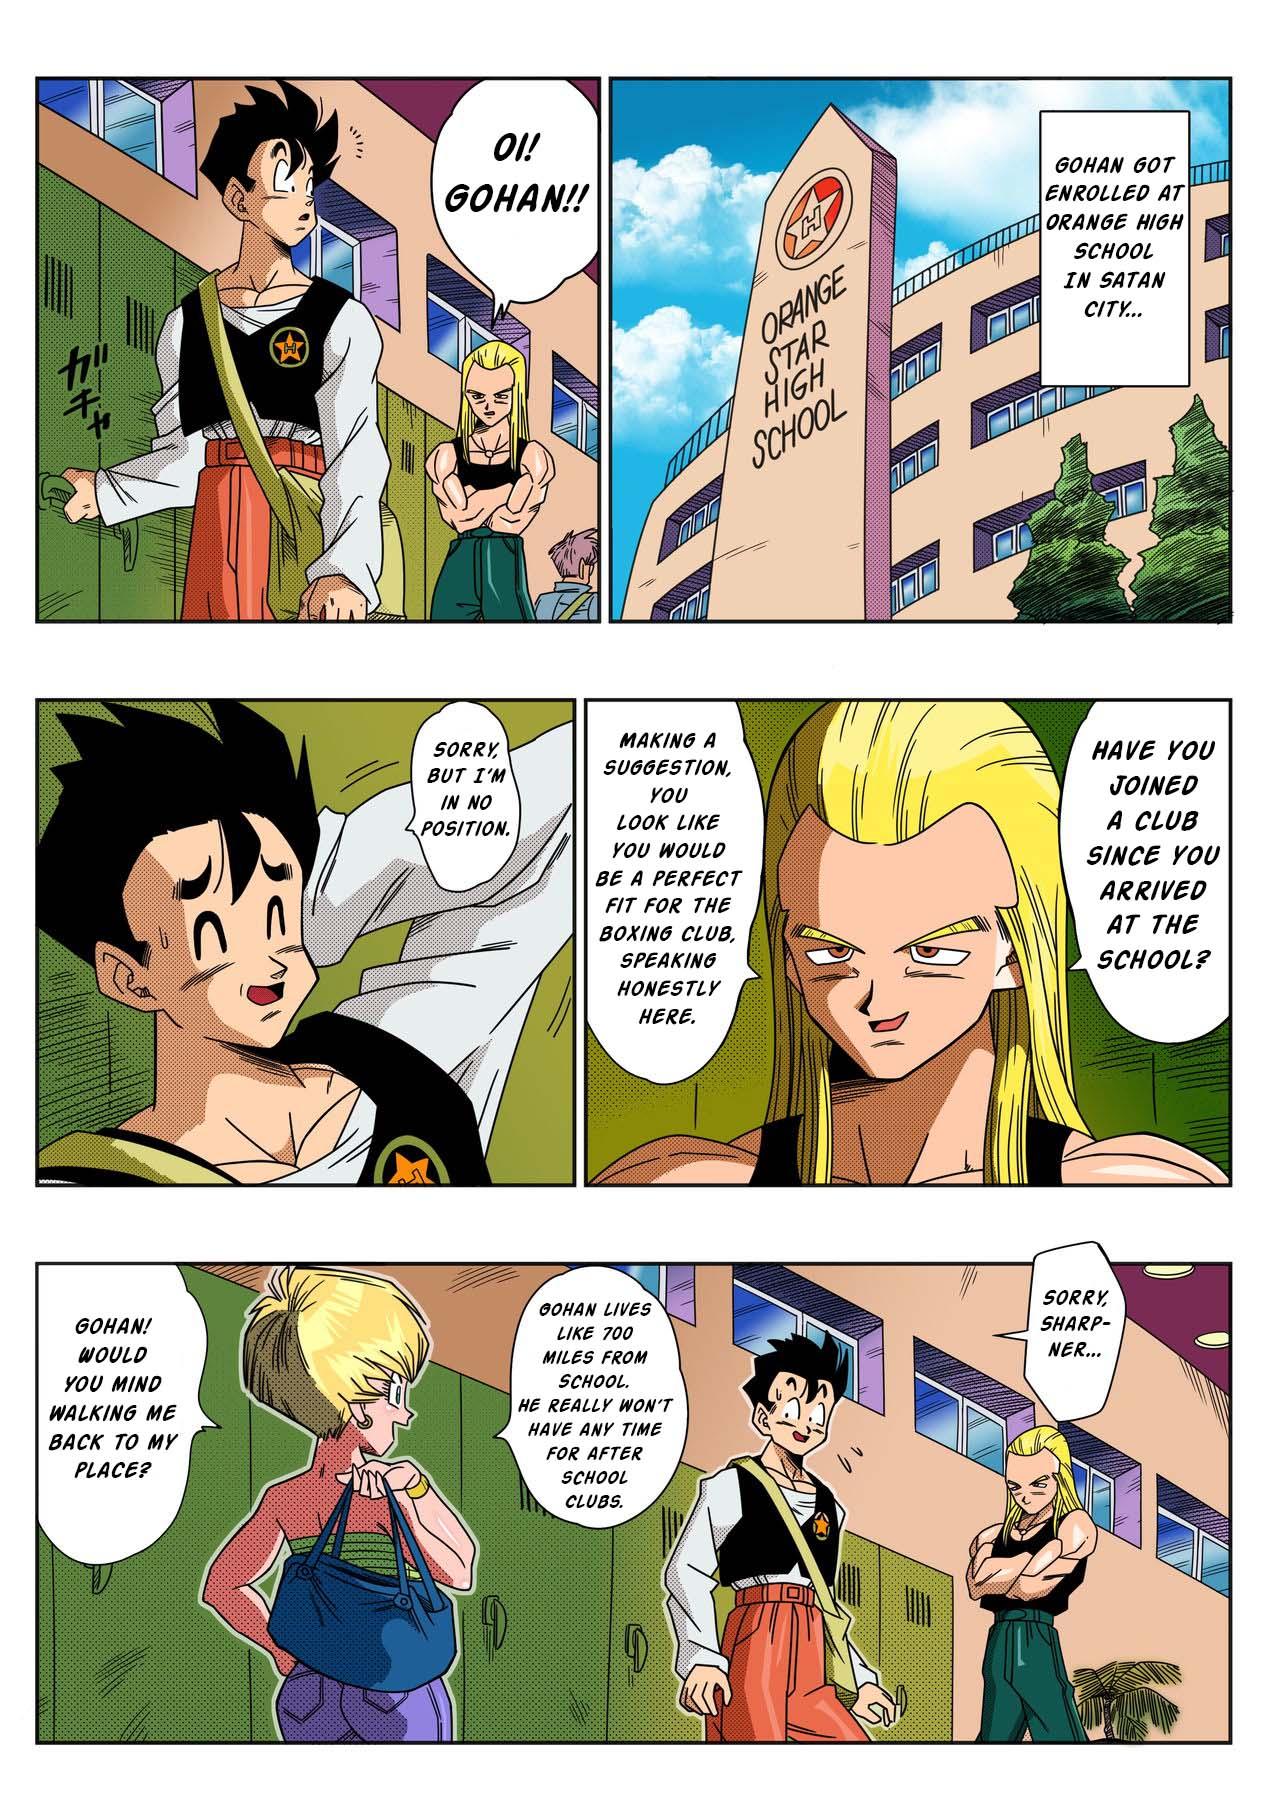 Dominant LOVE TRIANGLE Z Part 1-4 - Dragon ball z Behind - Page 4